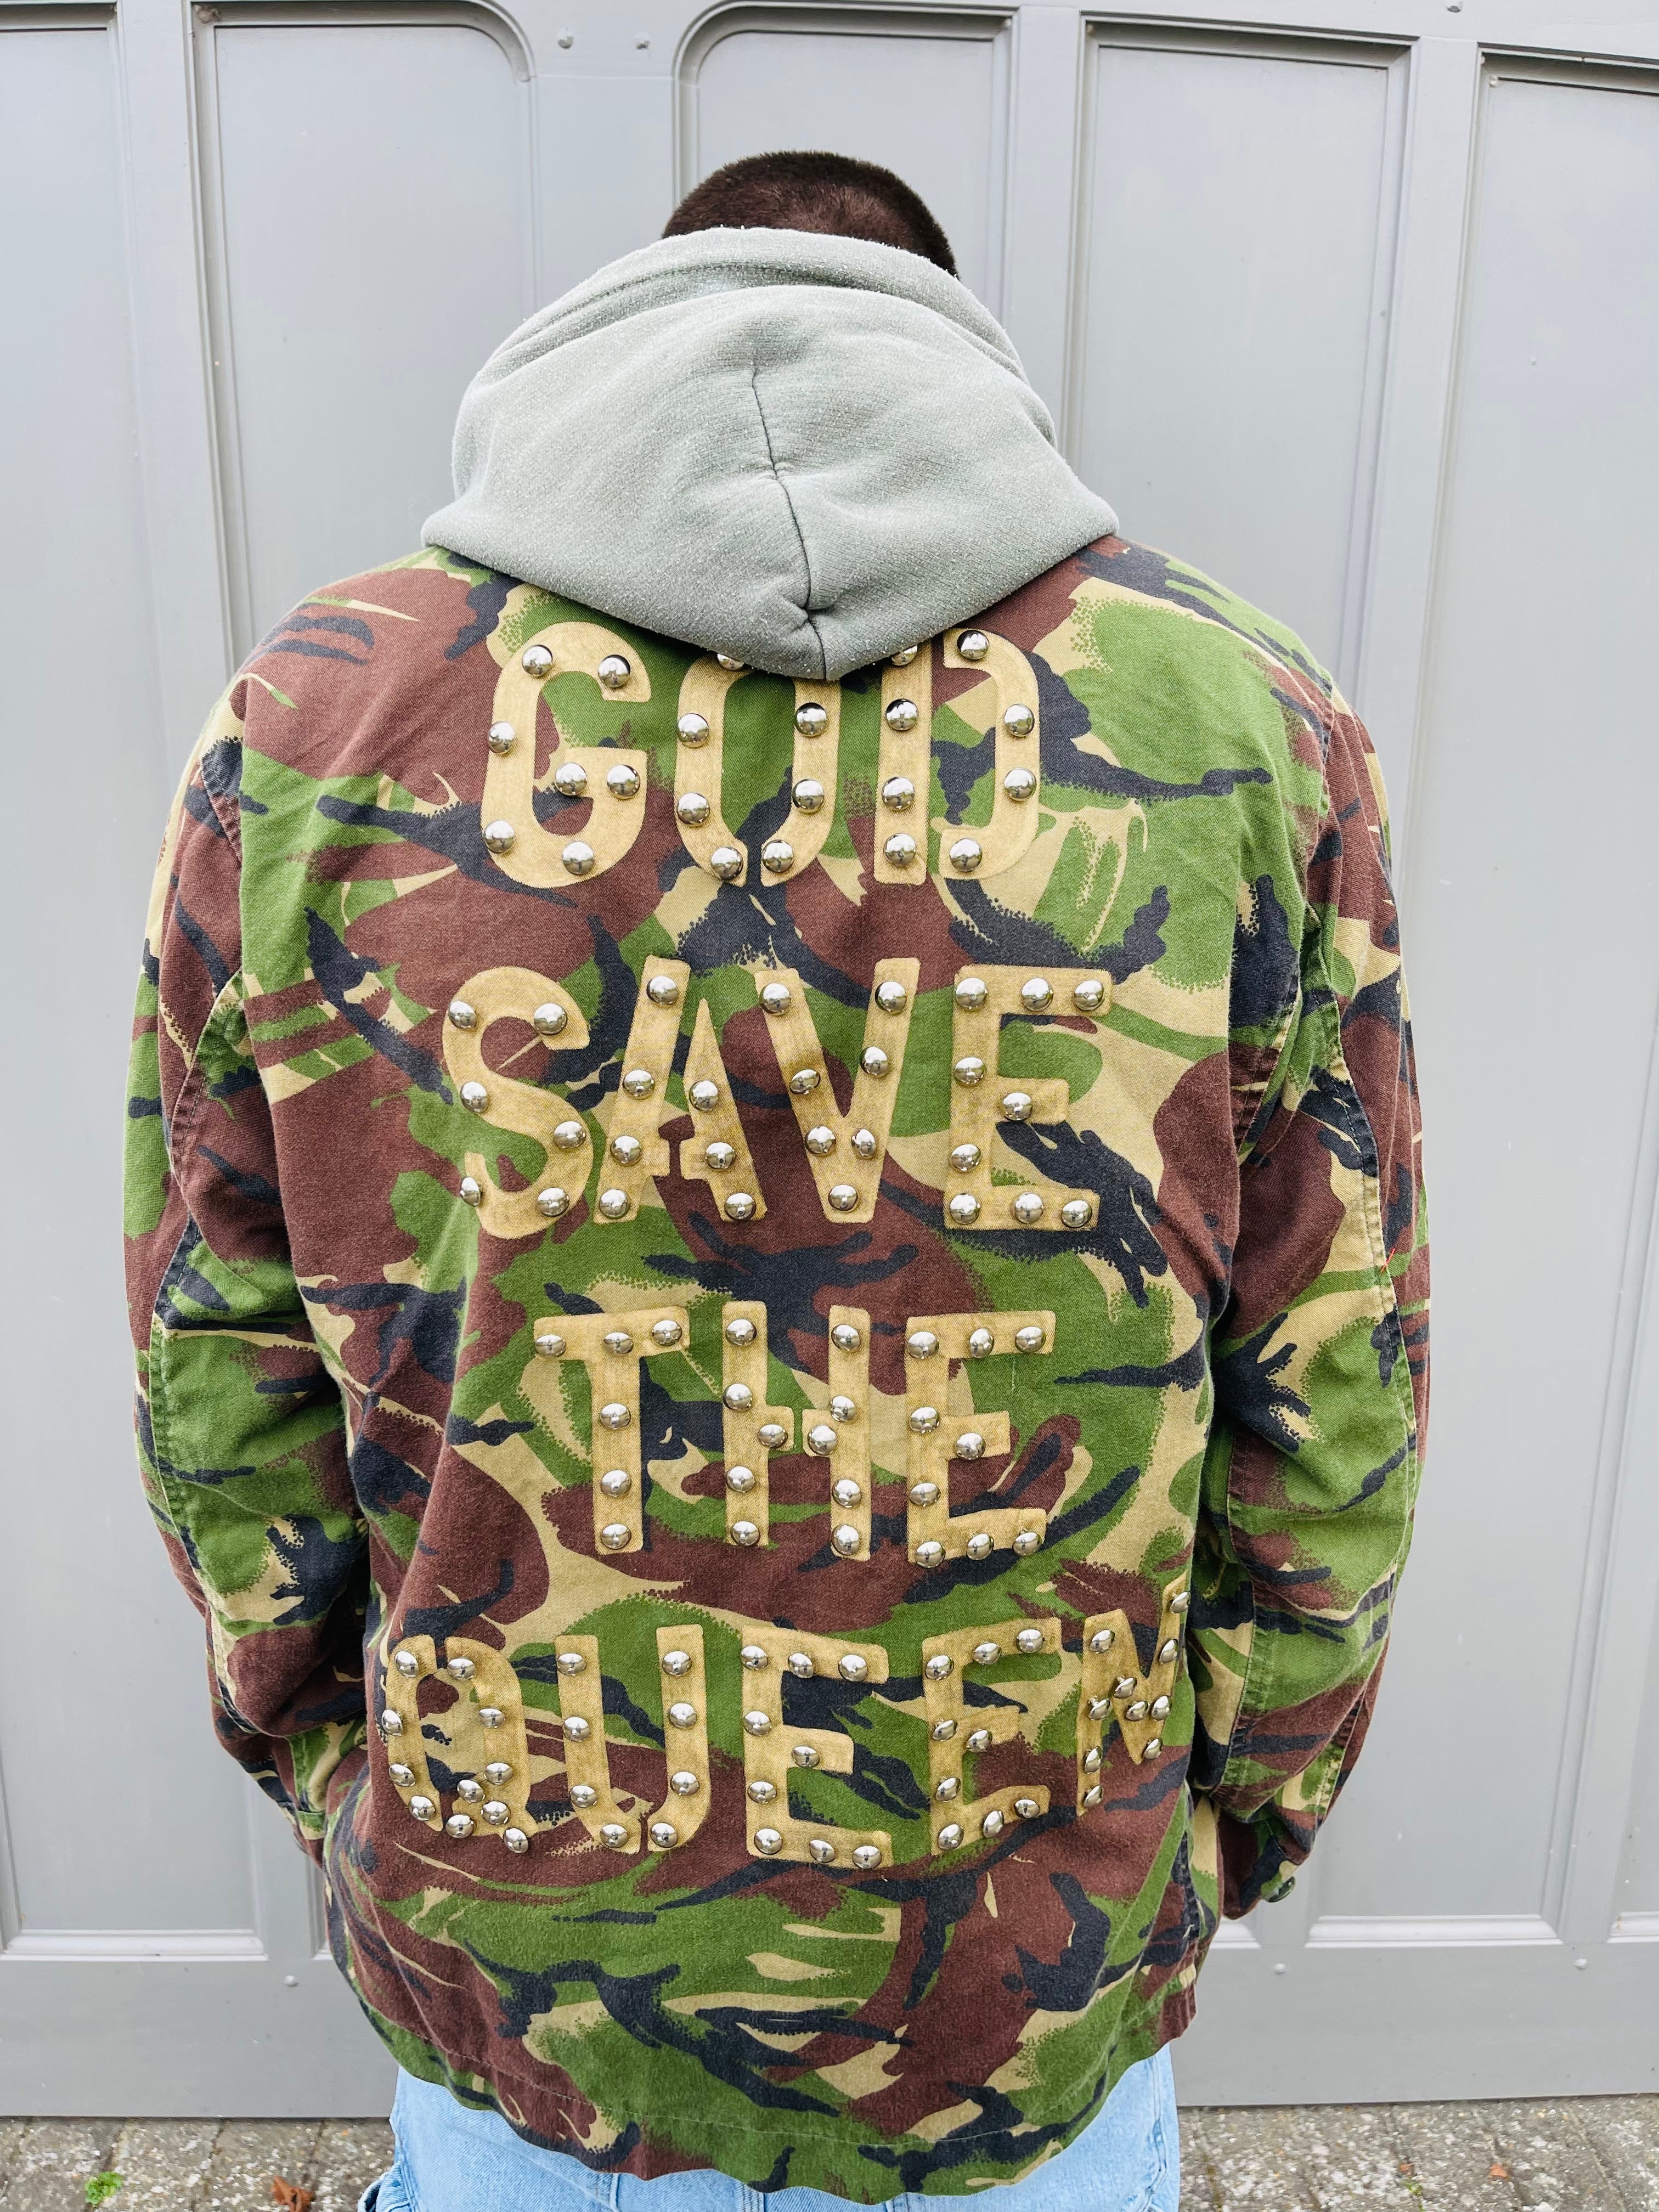 'God Save The Queen' Green Camo Jacket